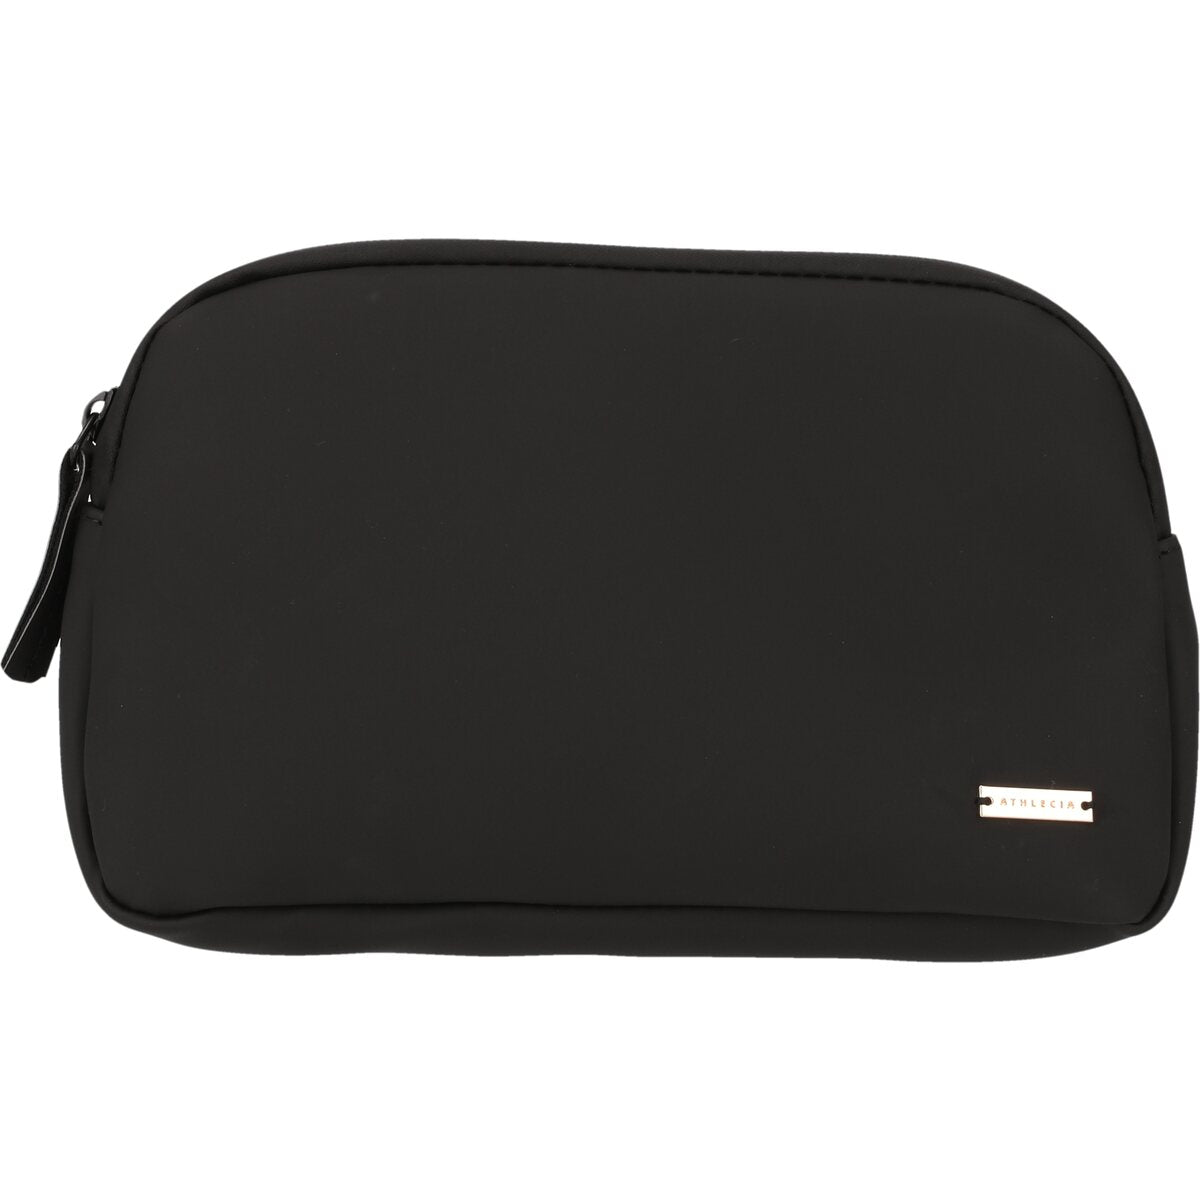 Athlecia Berlin Cosmetic Purse - Black 1 Shaws Department Stores